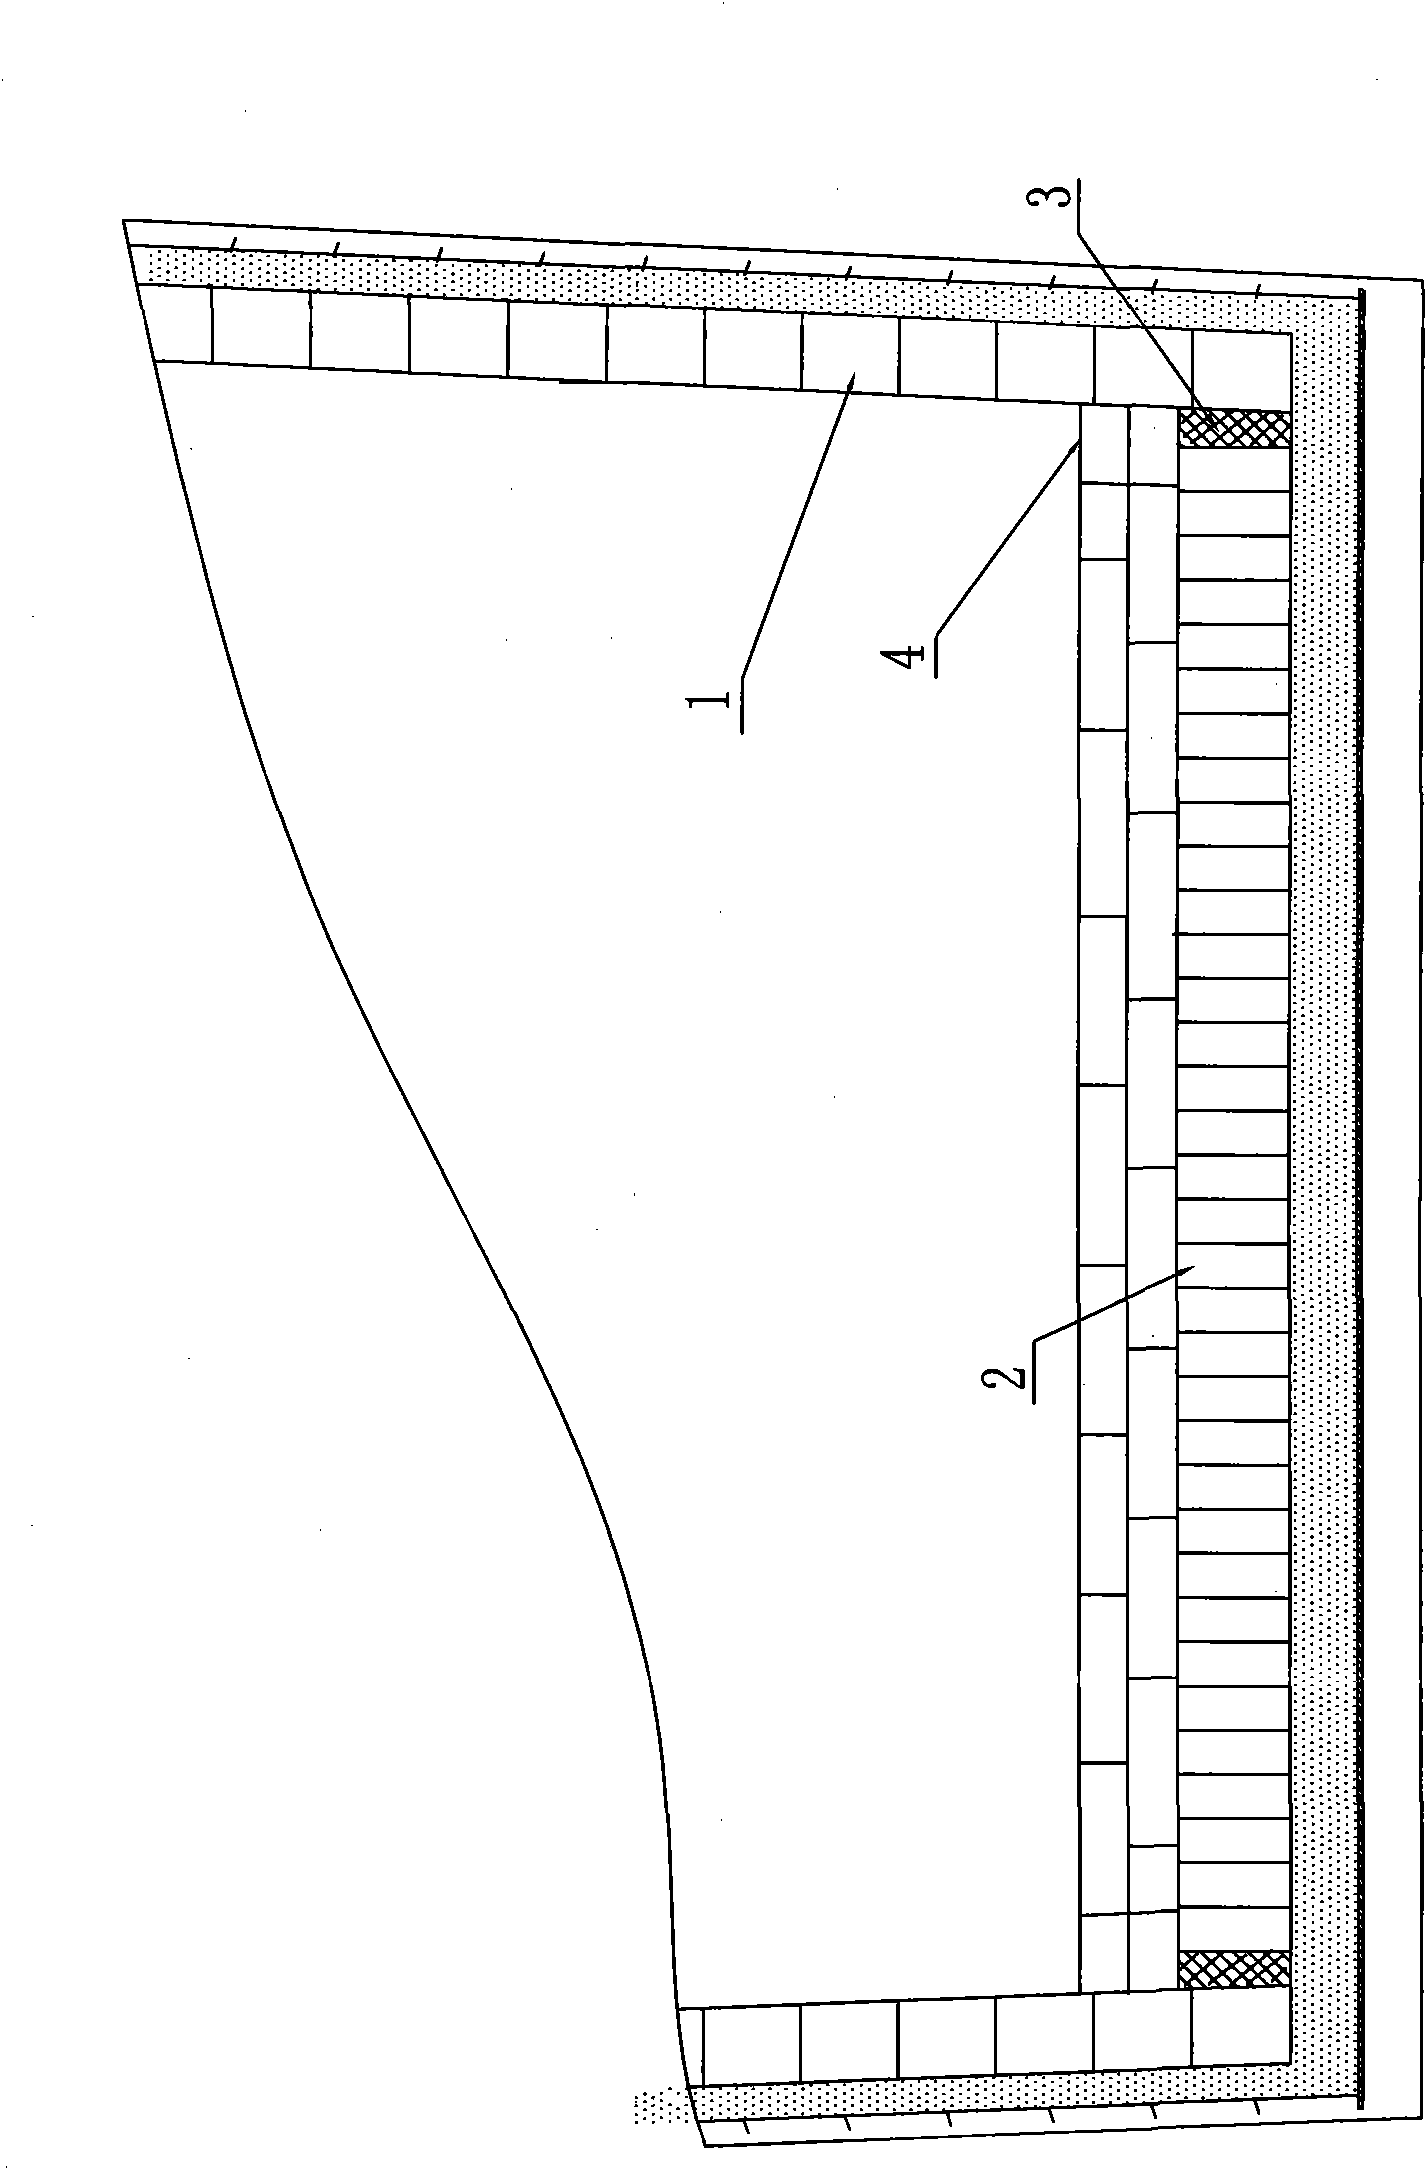 Method for laying bottom of prefabricated block ladle by using small building blocks